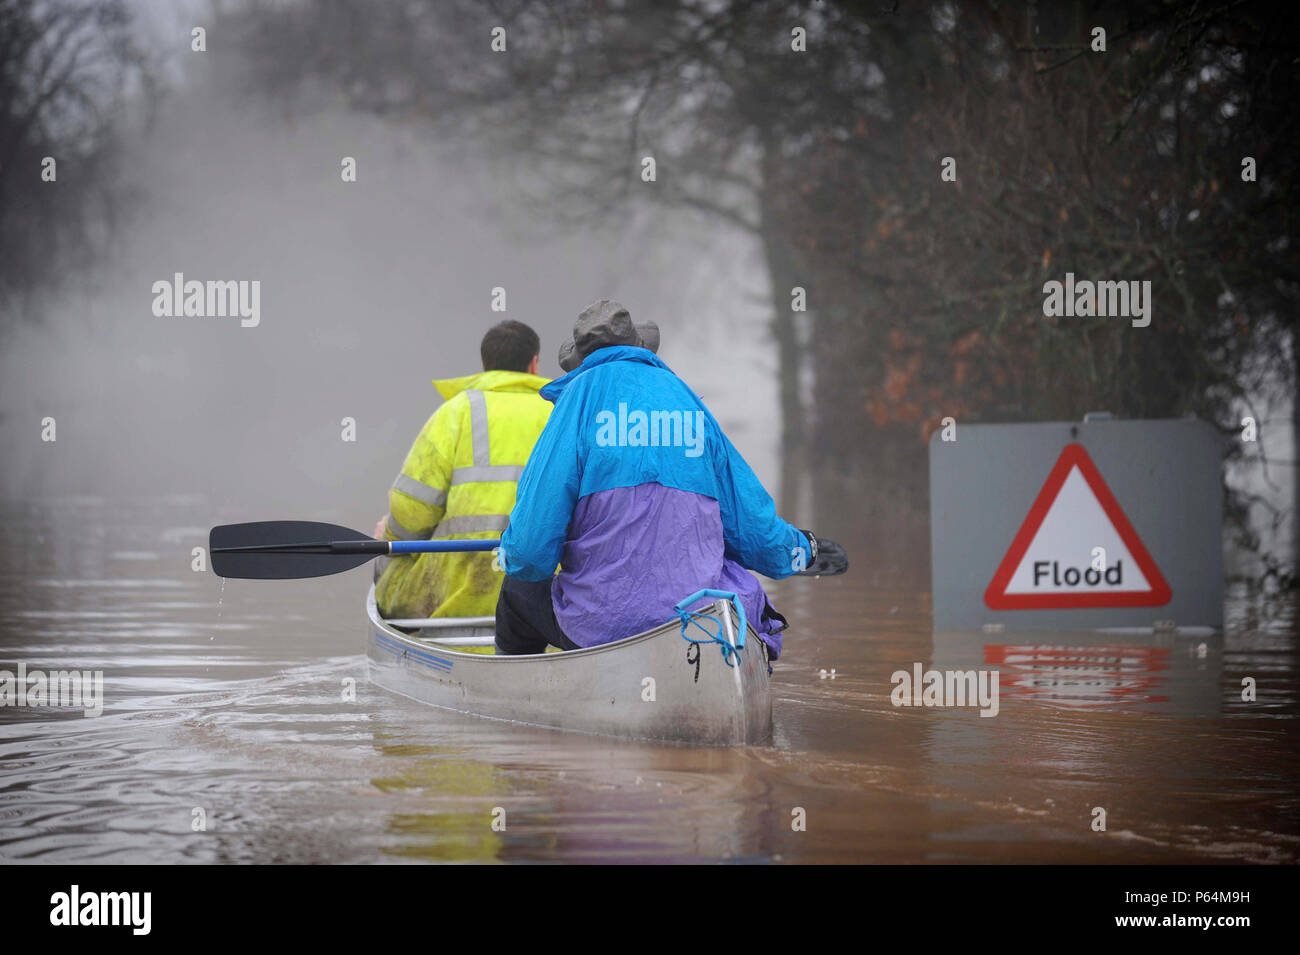 Two people canoeing past flood sign during floods, Gloucestershire, UK, 2007 Stock Photo